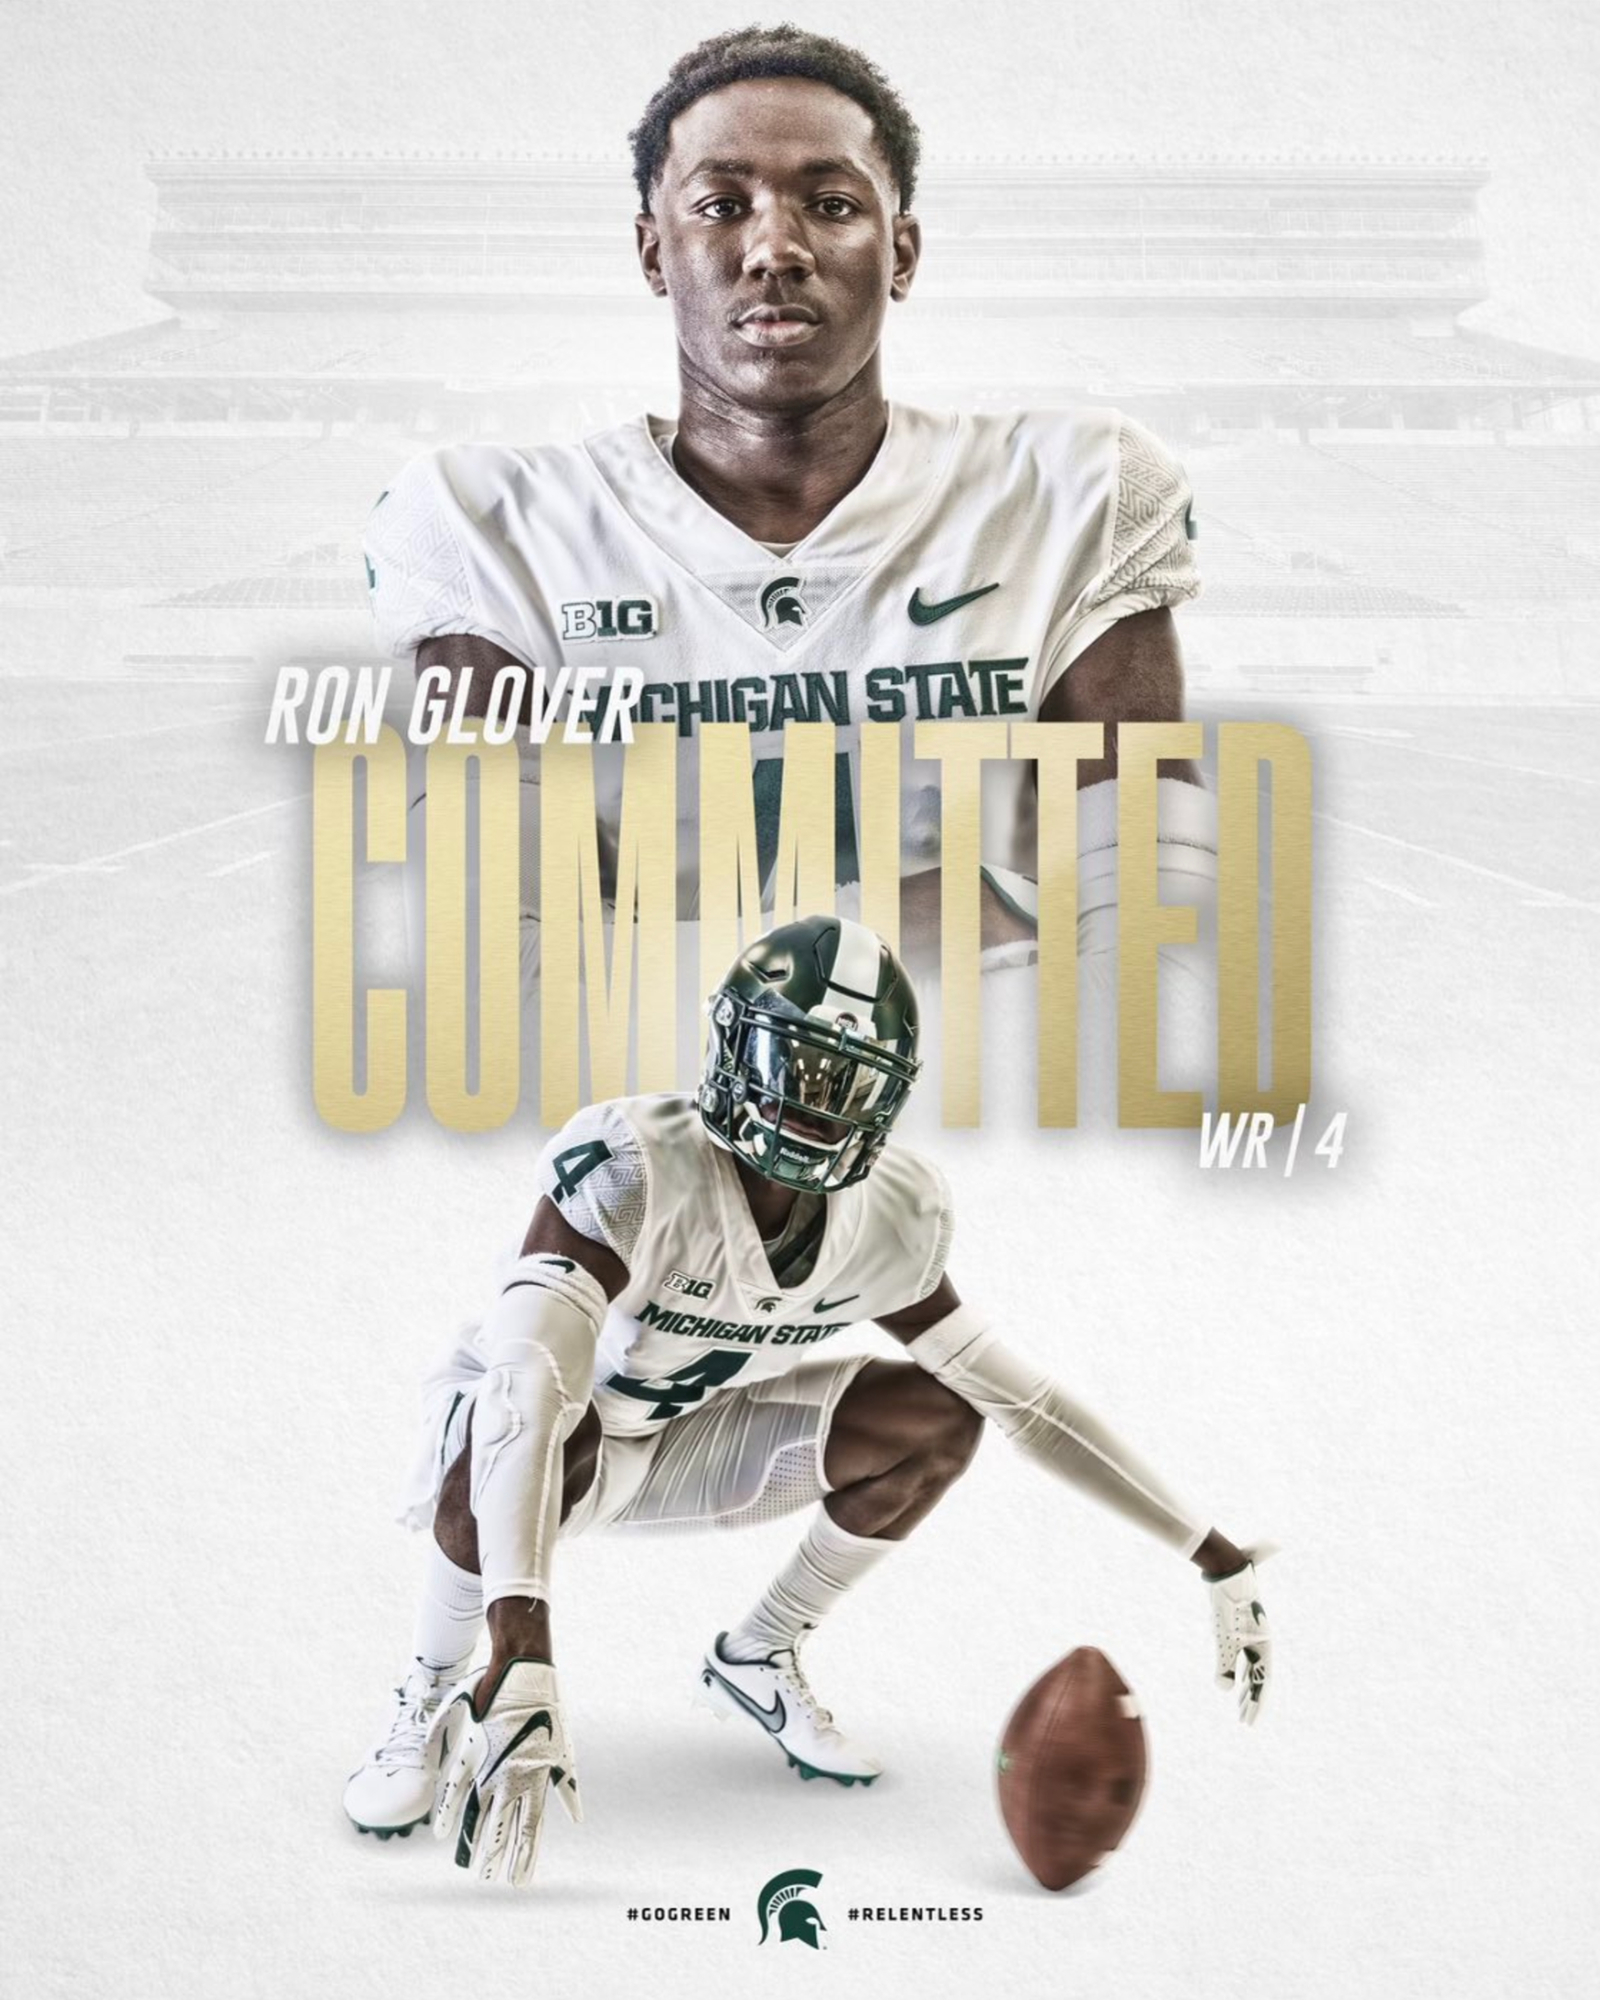 Jaron Glover shared this graphic on Twitter to announce his commitment to Michigan State.